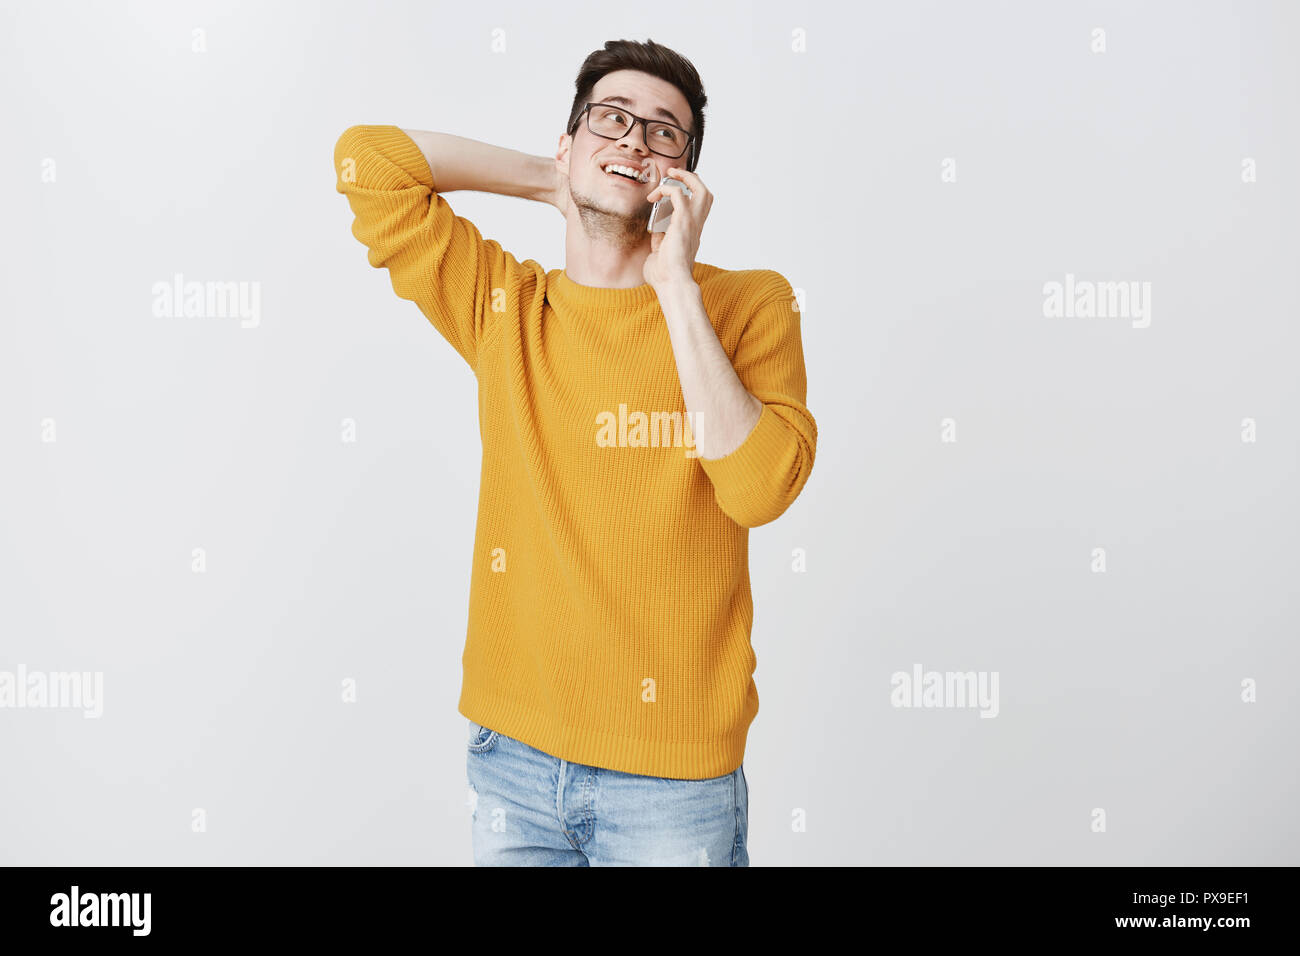 Handsome cute boyfriend being shy and hesitating scratching back of neck tilting head up as talking on smartphone trying ask out girlfriend for date smiling silly posing in sweater over grey wall Stock Photo